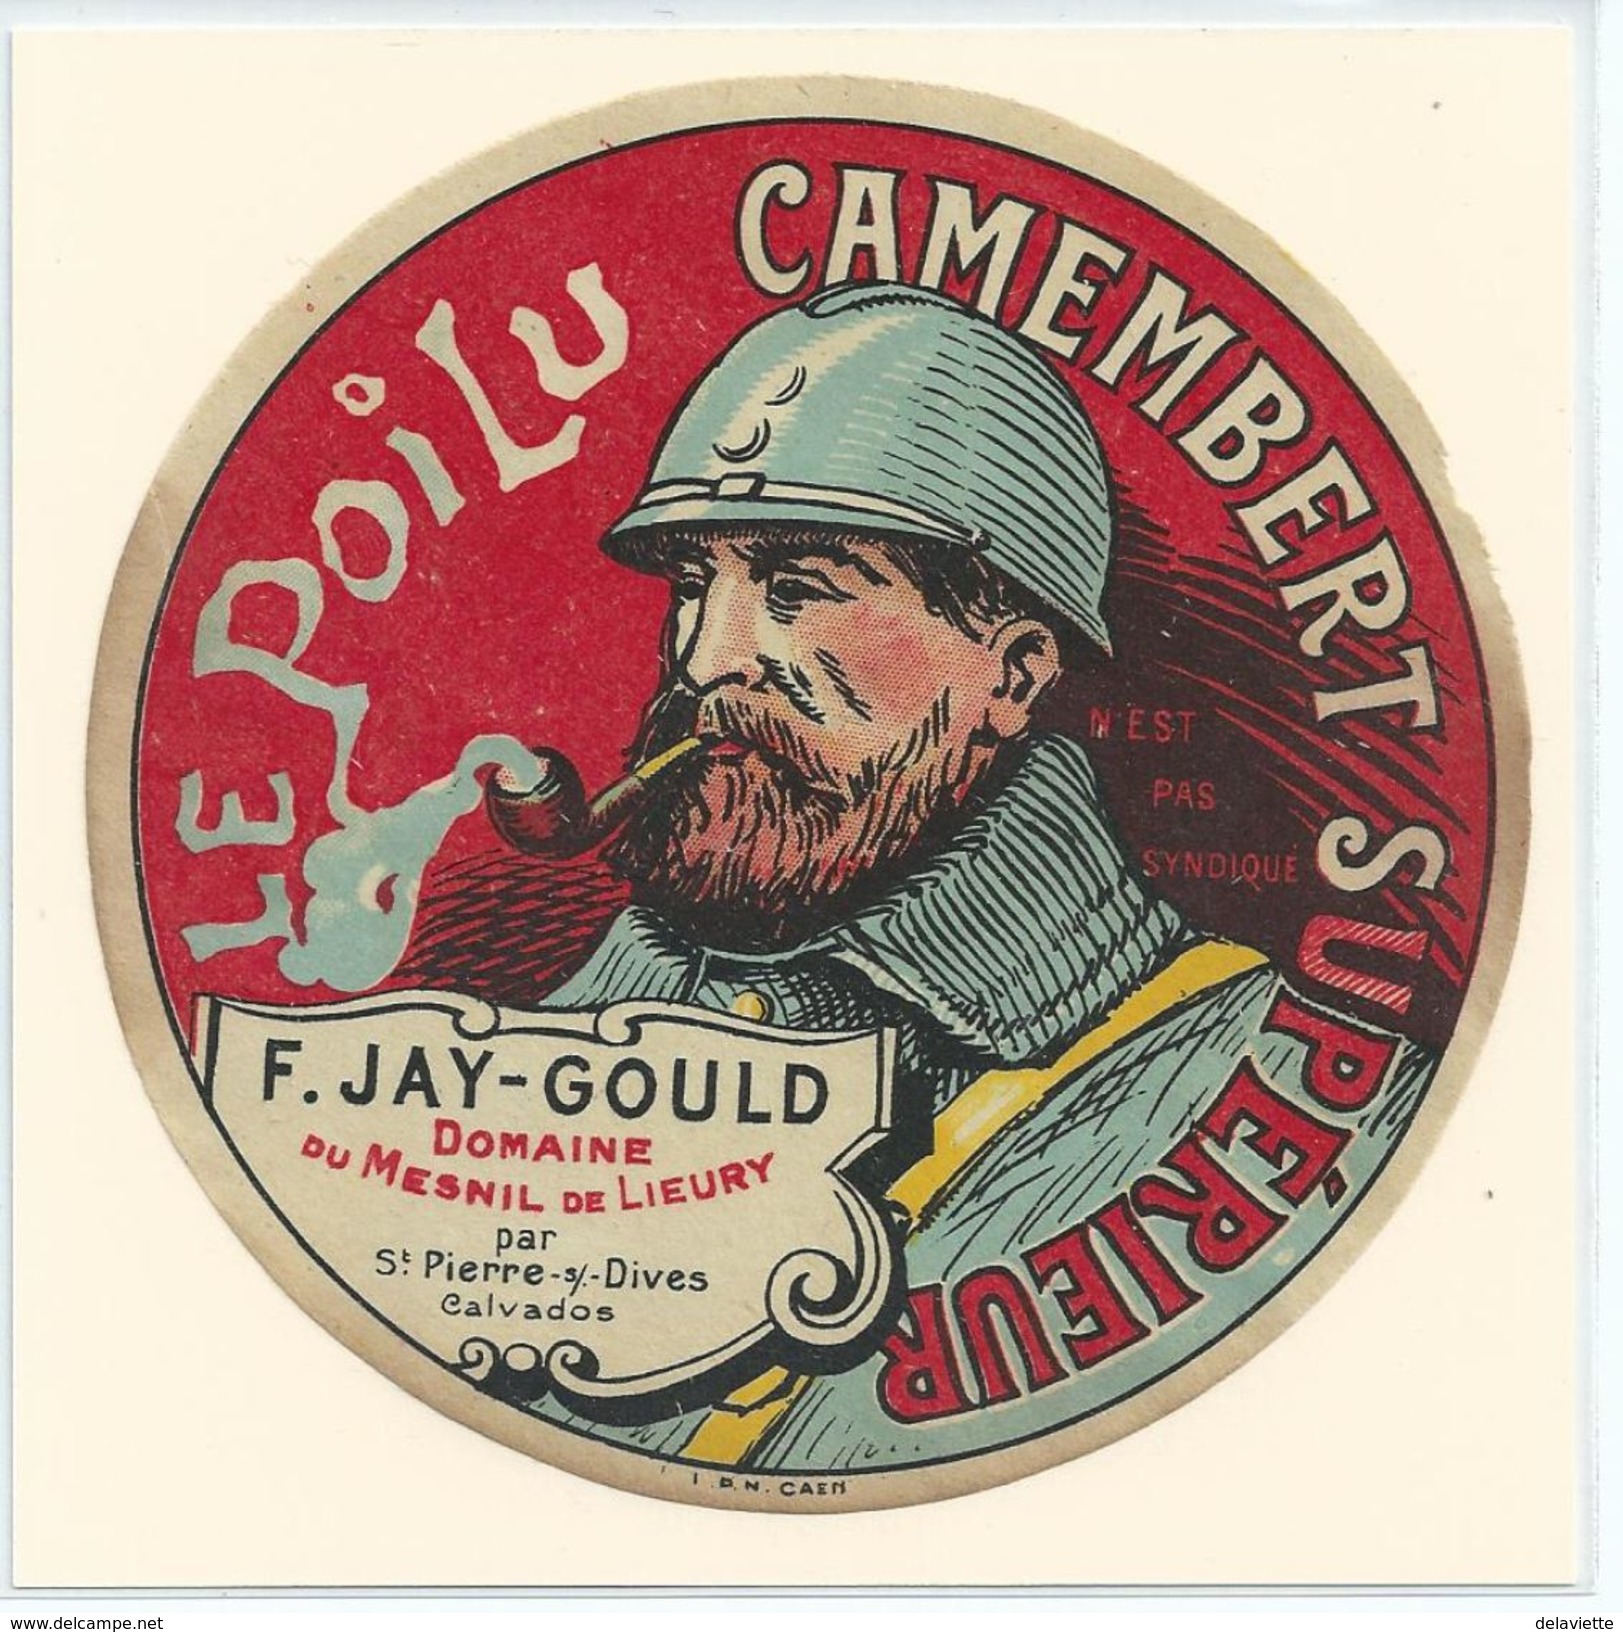 Etiquette Camembert  Le Poilu  F. Jay - Gould - Cheese